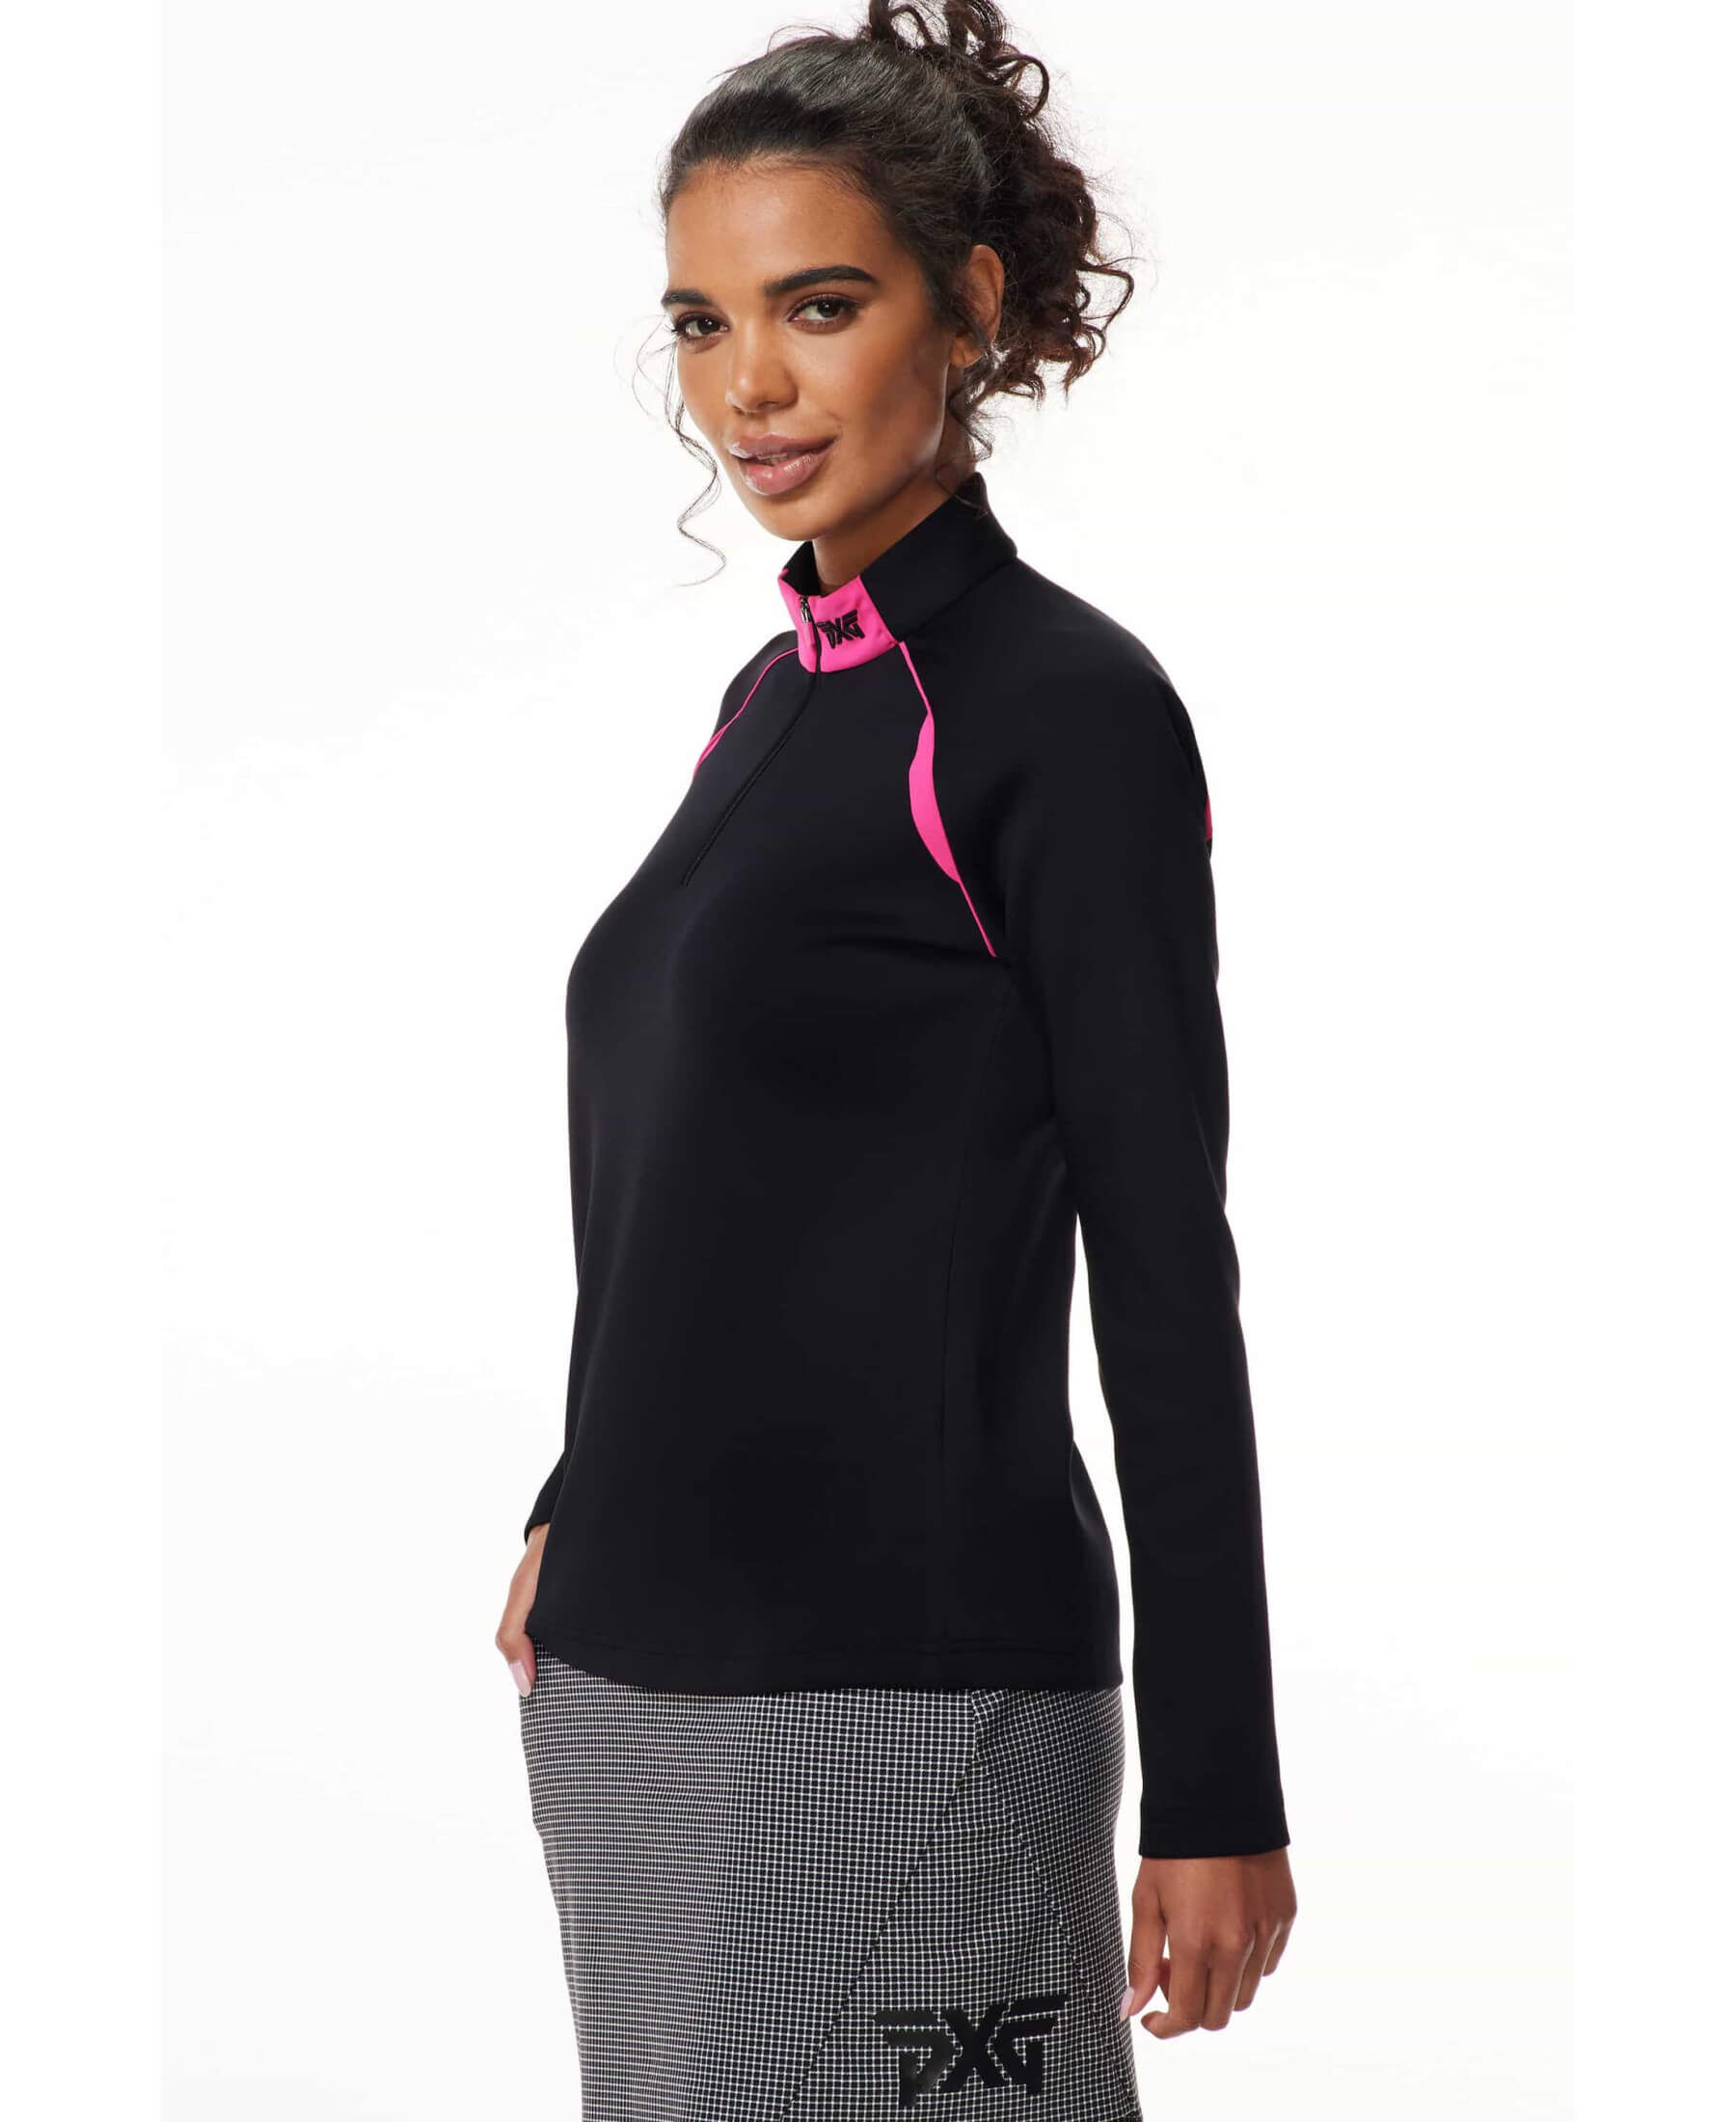 Flux 1/4 Zip Pullover | Shop the Highest Quality Golf Apparel